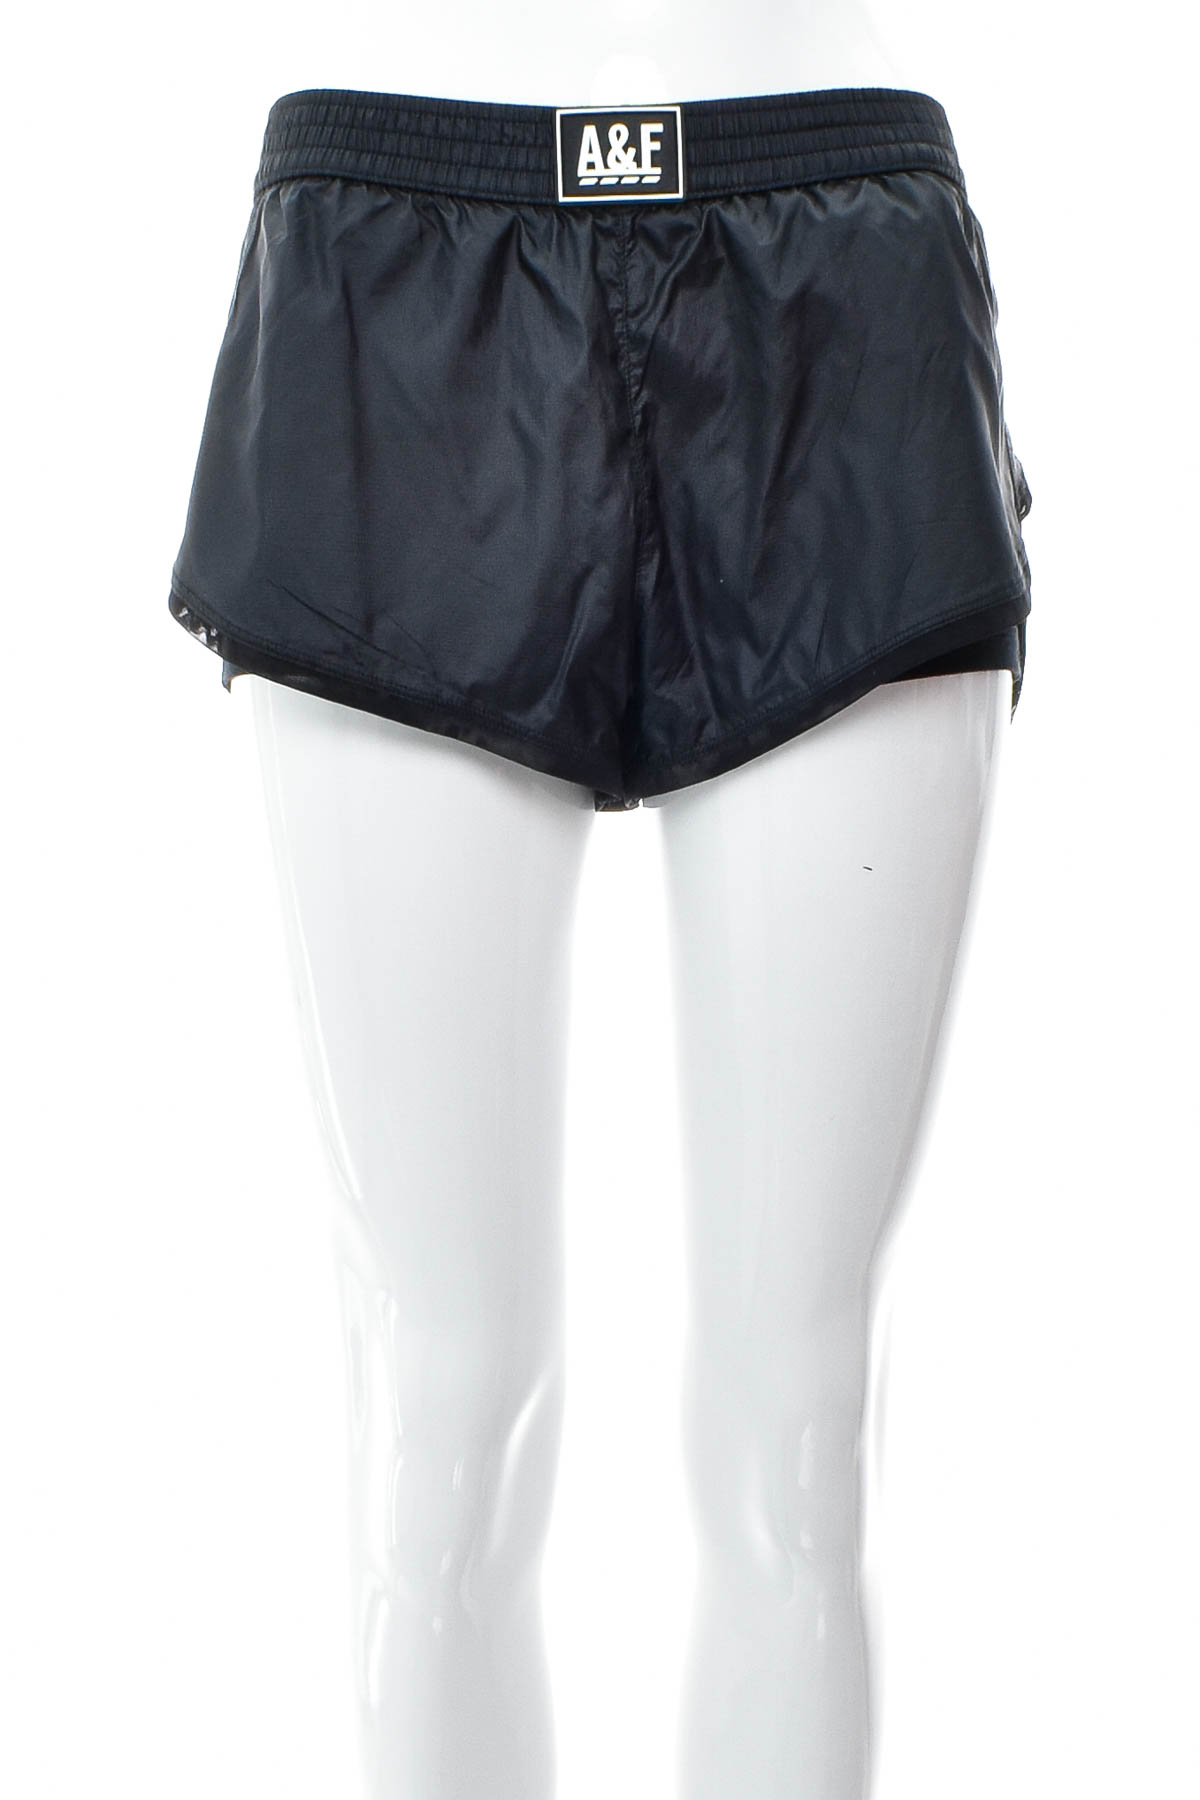 Women's shorts - Abercrombie & Fitch - 0